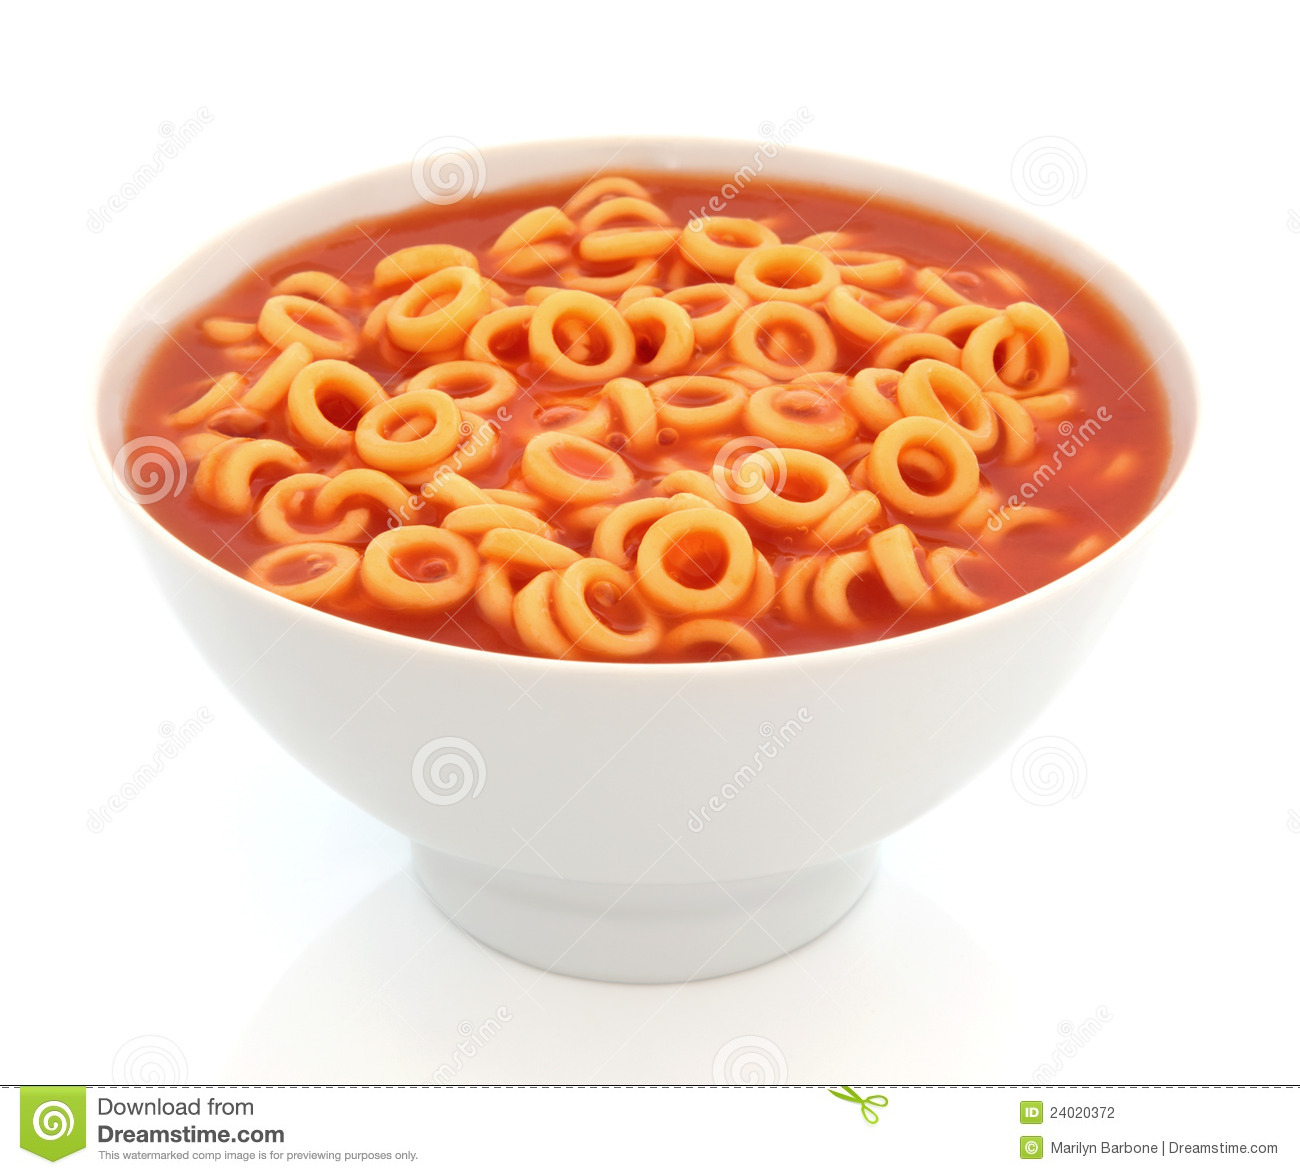 Spaghetti Pasta Hoops In Tomato Sauce In A Porcelain Bowl With Fork